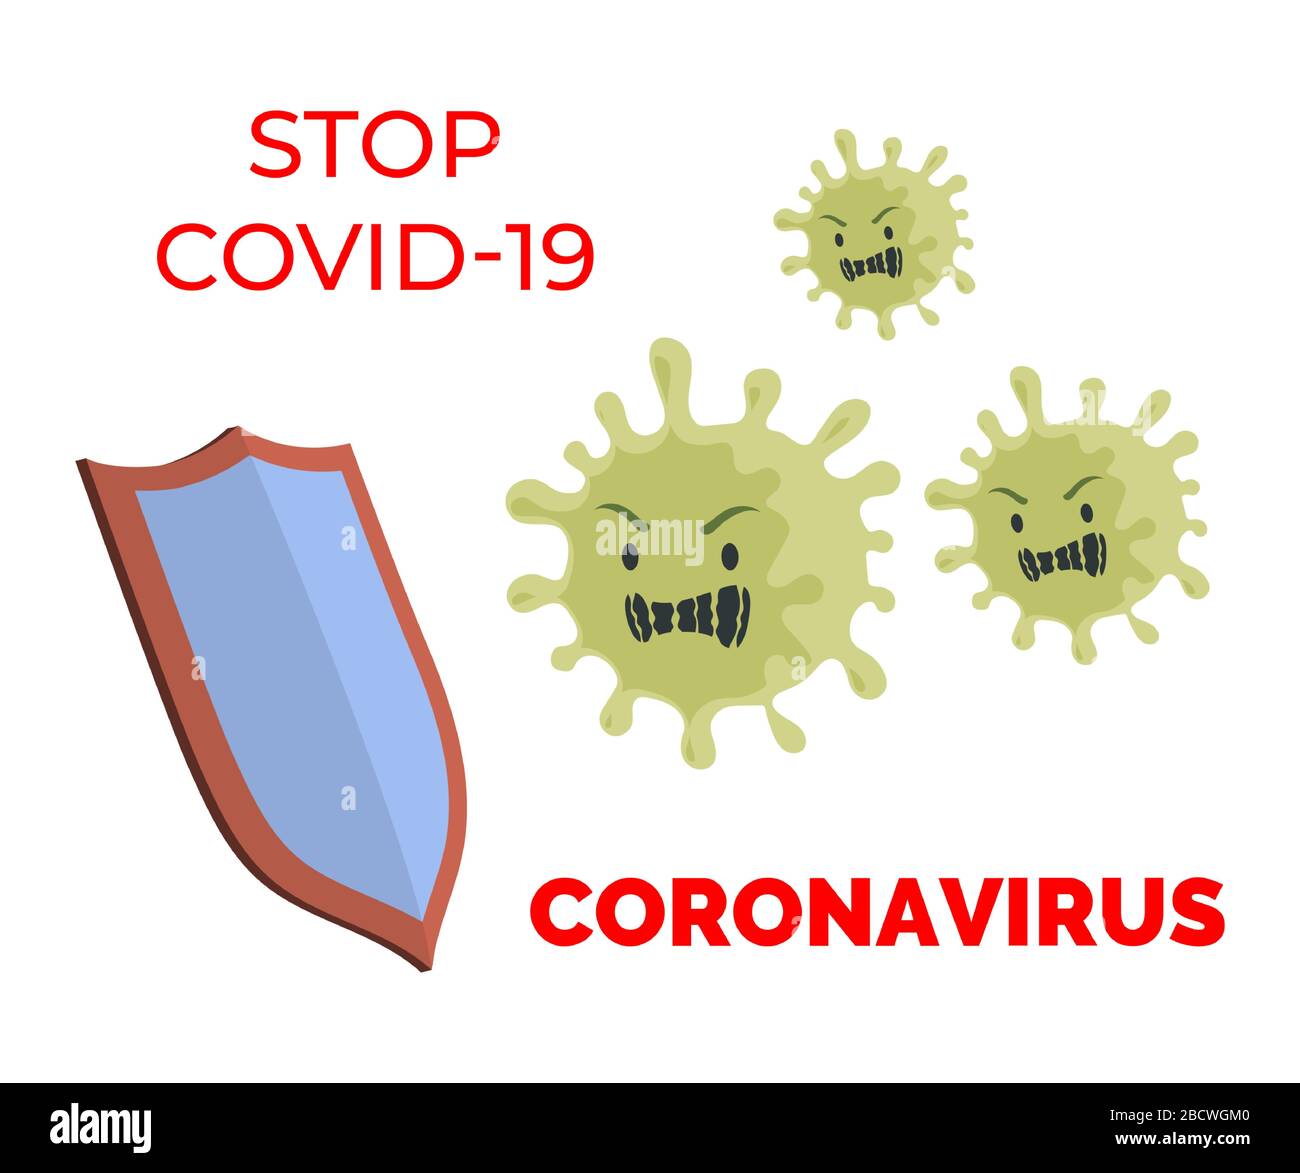 Stop Covid-19 flat banner concept. Coronavirus cells stopped by knight shield vector flat illustration. Quarantine and self-isolation during global pandemic poster design. Stock Vector